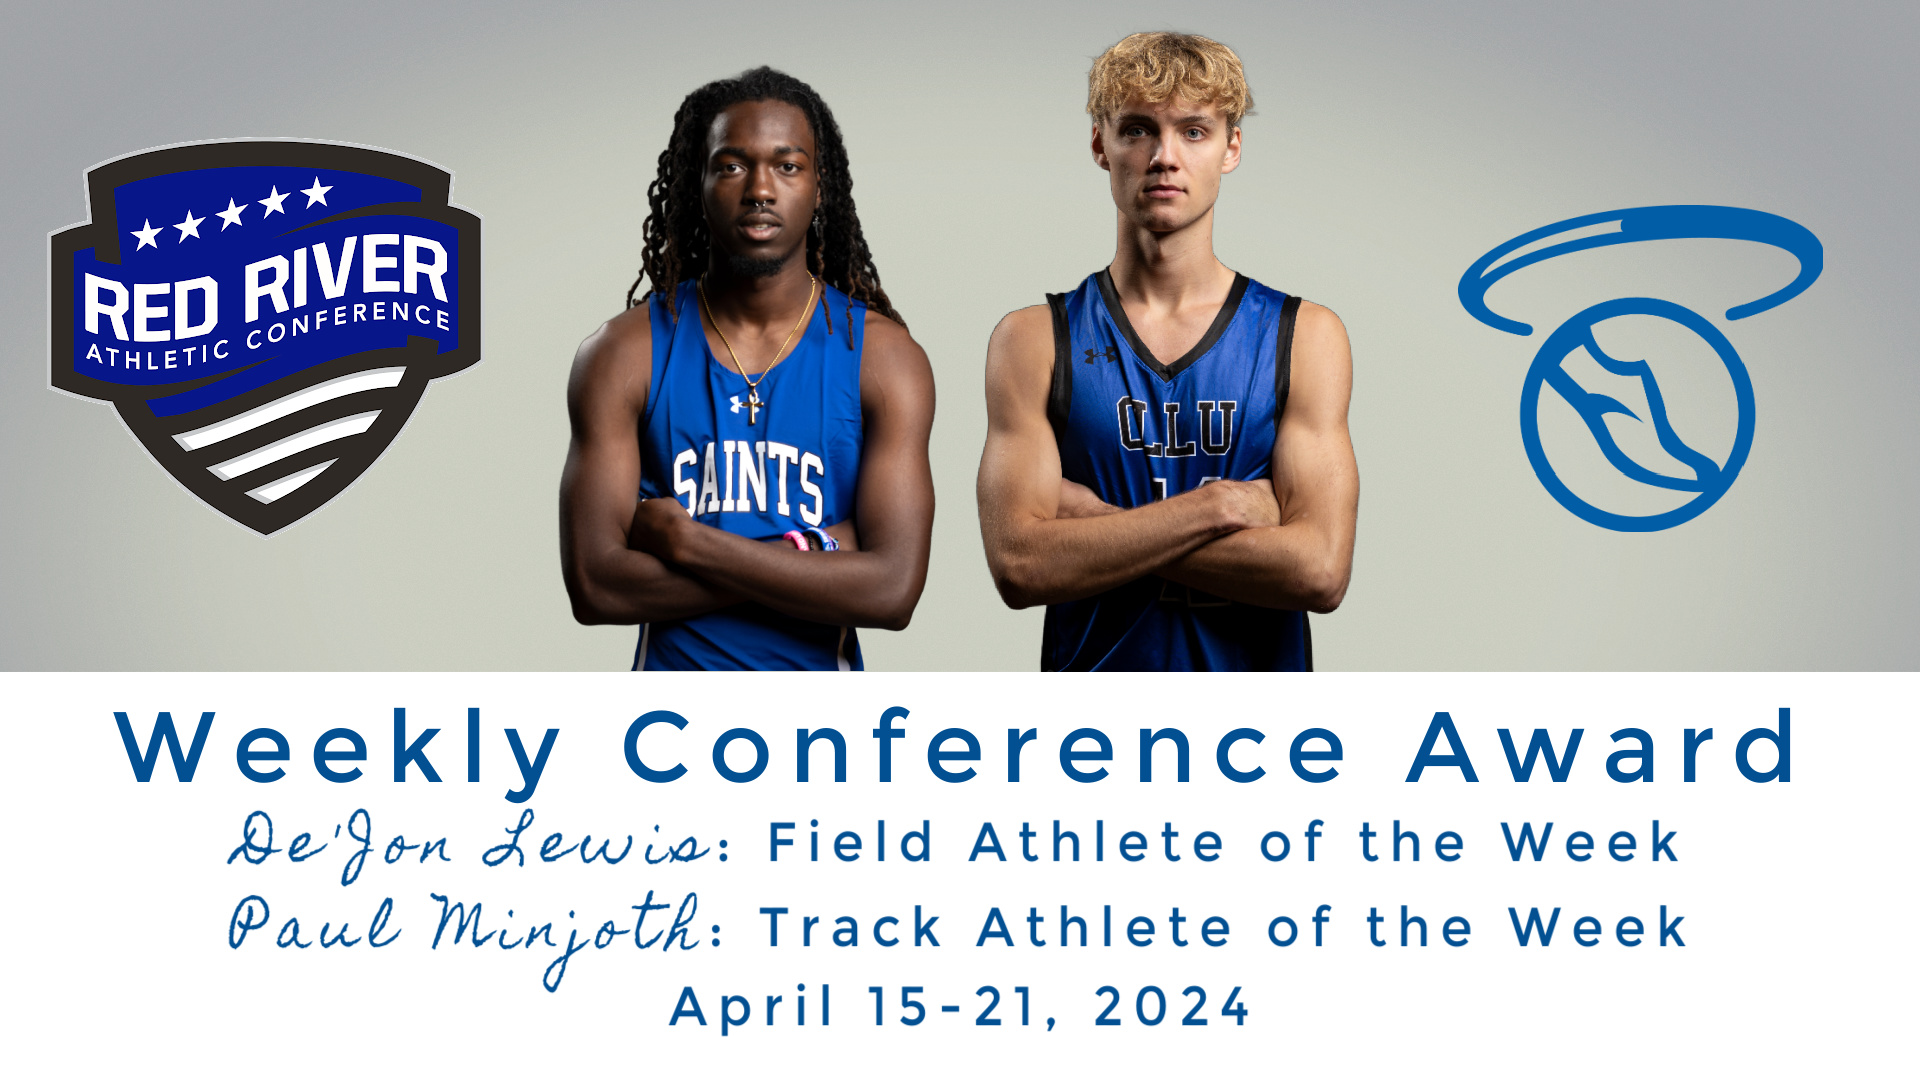 Paul Minjoth and De'Jon Lewis Win Track and Field Weekly Awards